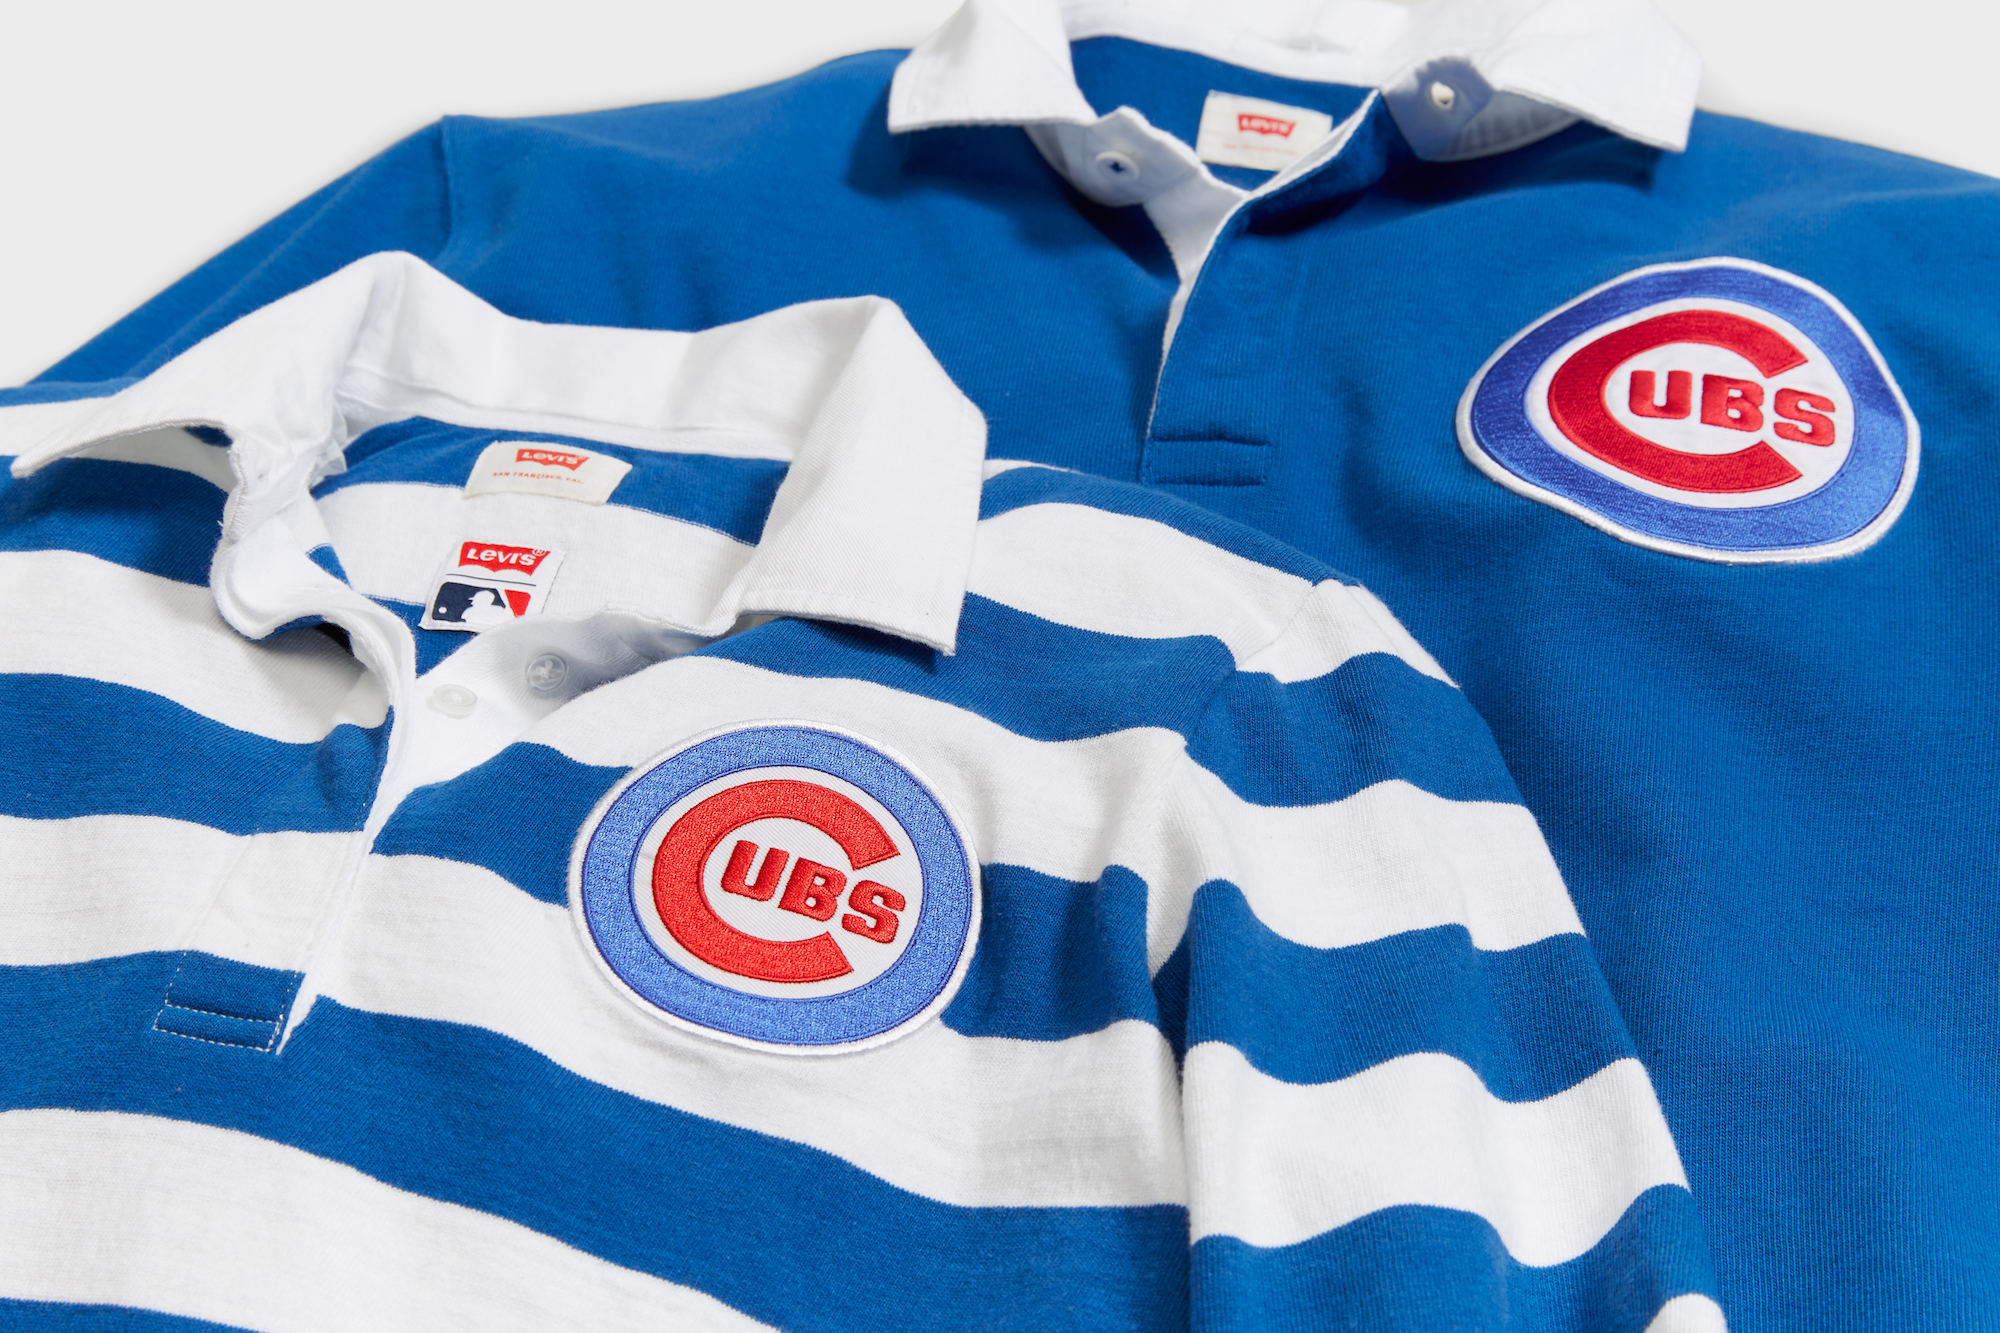 Vintage Chicago Cubs Rugby Shirt